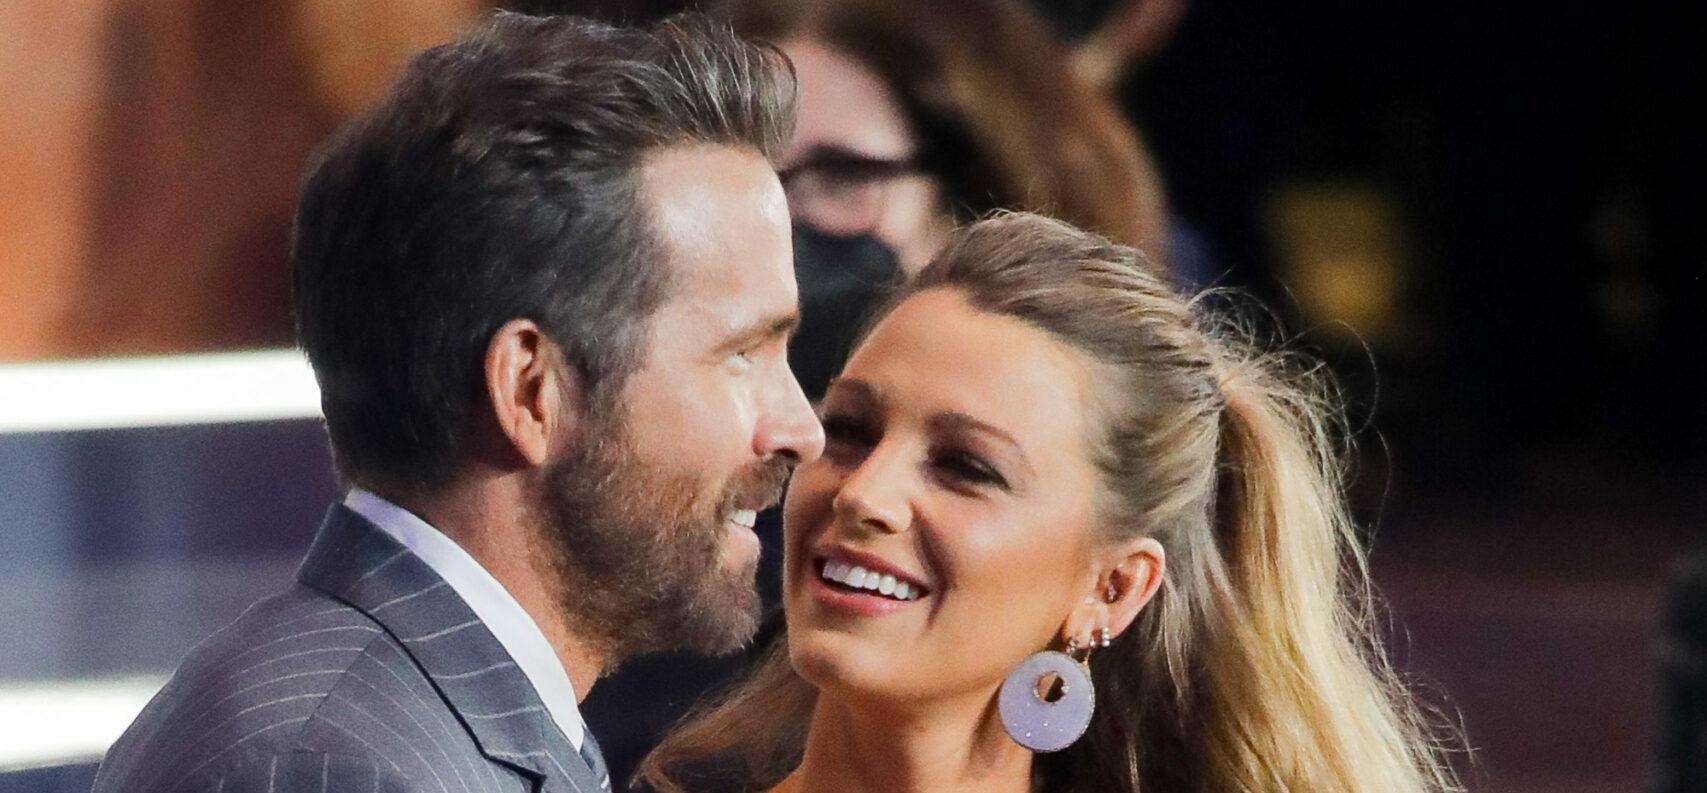 Blake Lively Relishes In Husband, Ryan Reynolds’, Crippling Anxiety On Live TV!